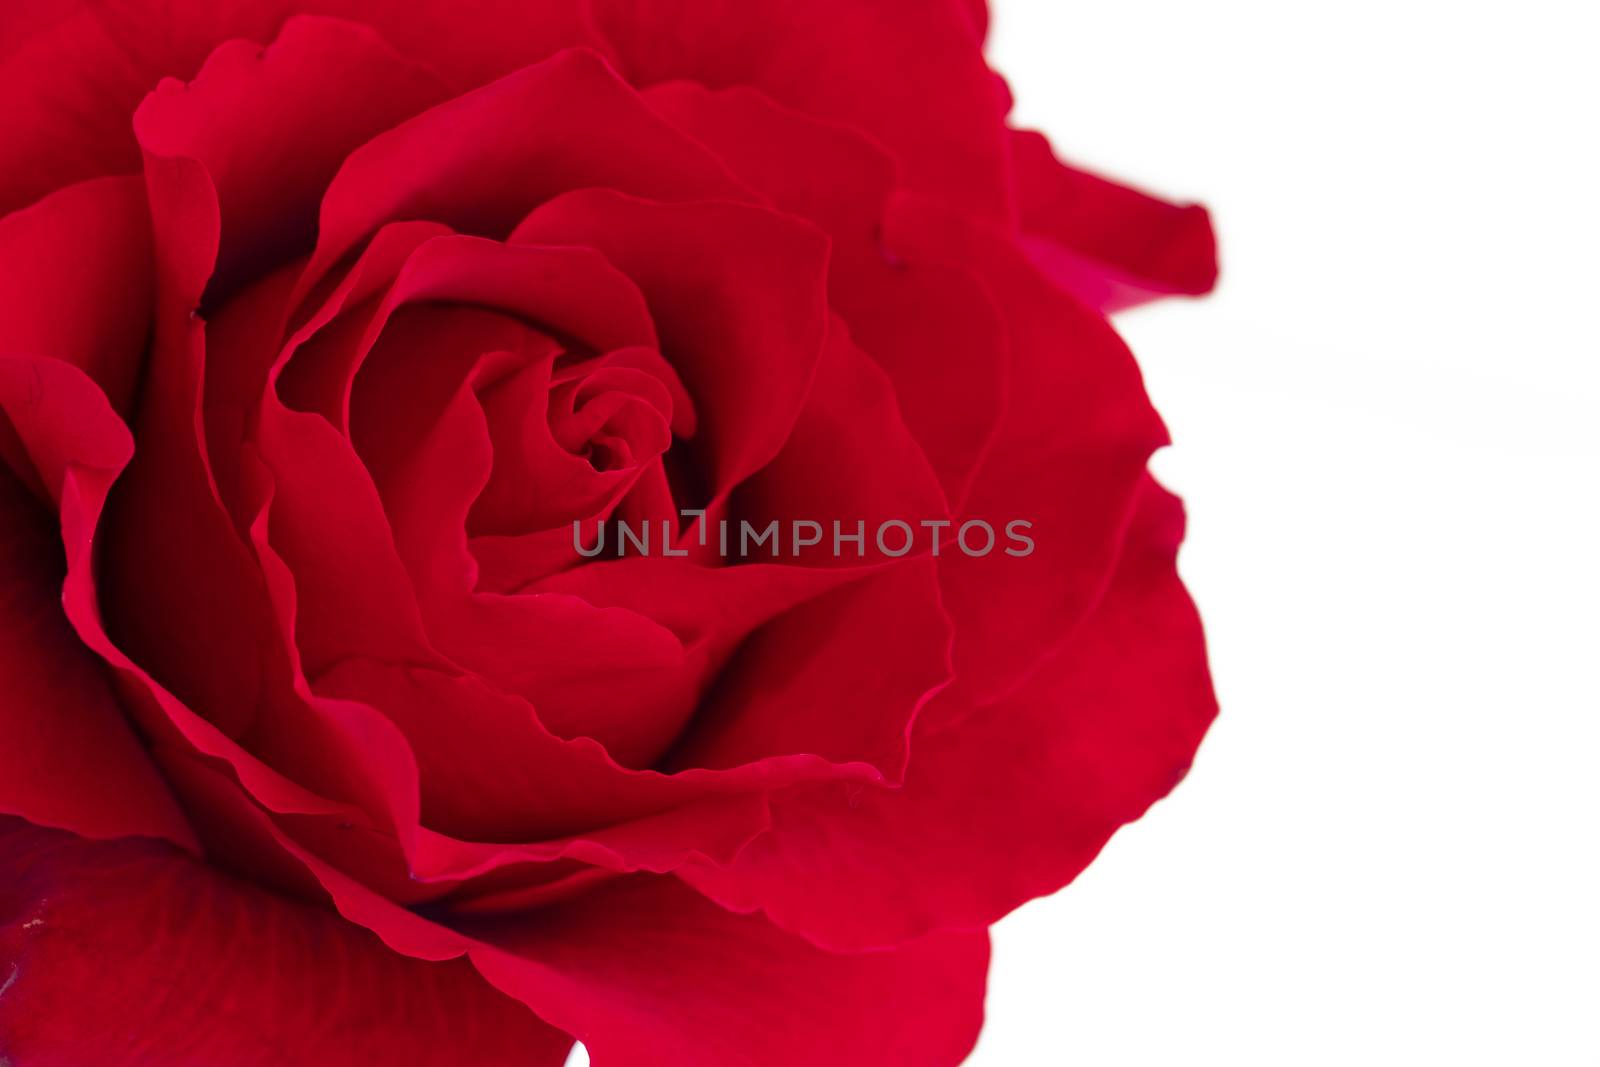 A single blooming red rose by Nawoot